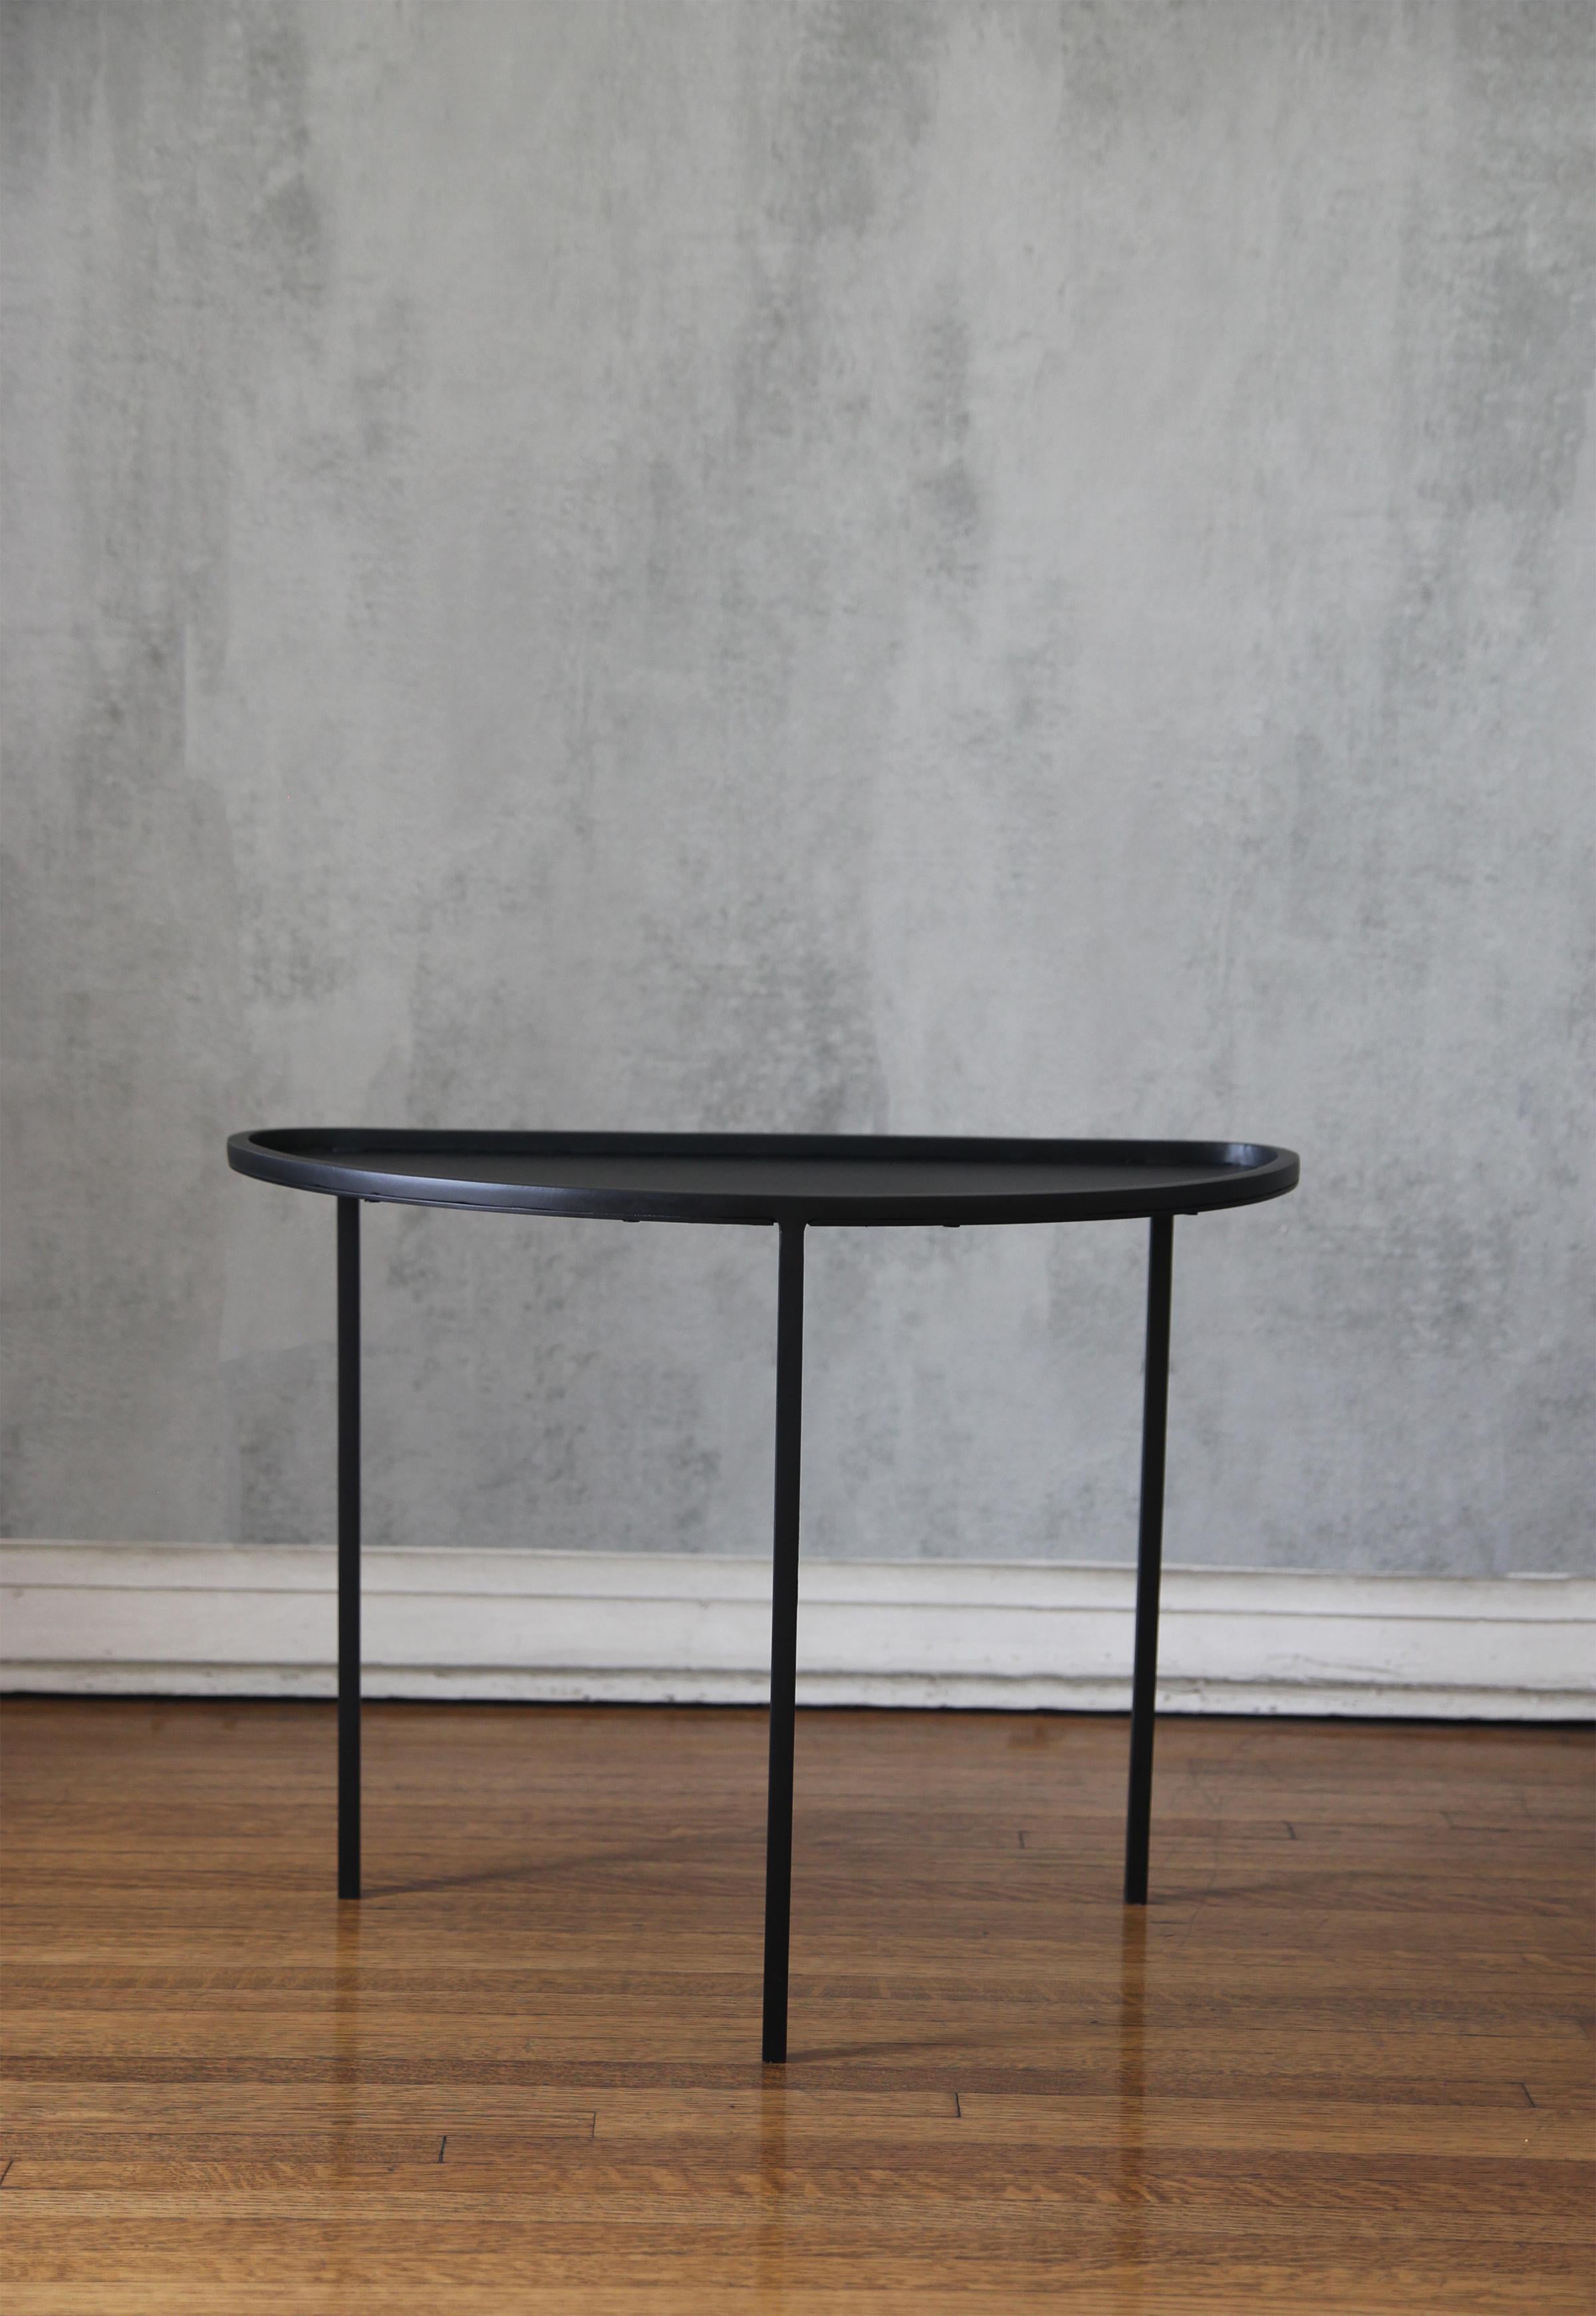 The 'Demi-Lune' from our exclusive Understated Design line. 
Chic slender three Legs blackened iron on a Demi-Lune Curved Black Powder-Coated top. 
Impressive Proportions, Versatile, Understated Elegance.

Custom sizes, finishes are